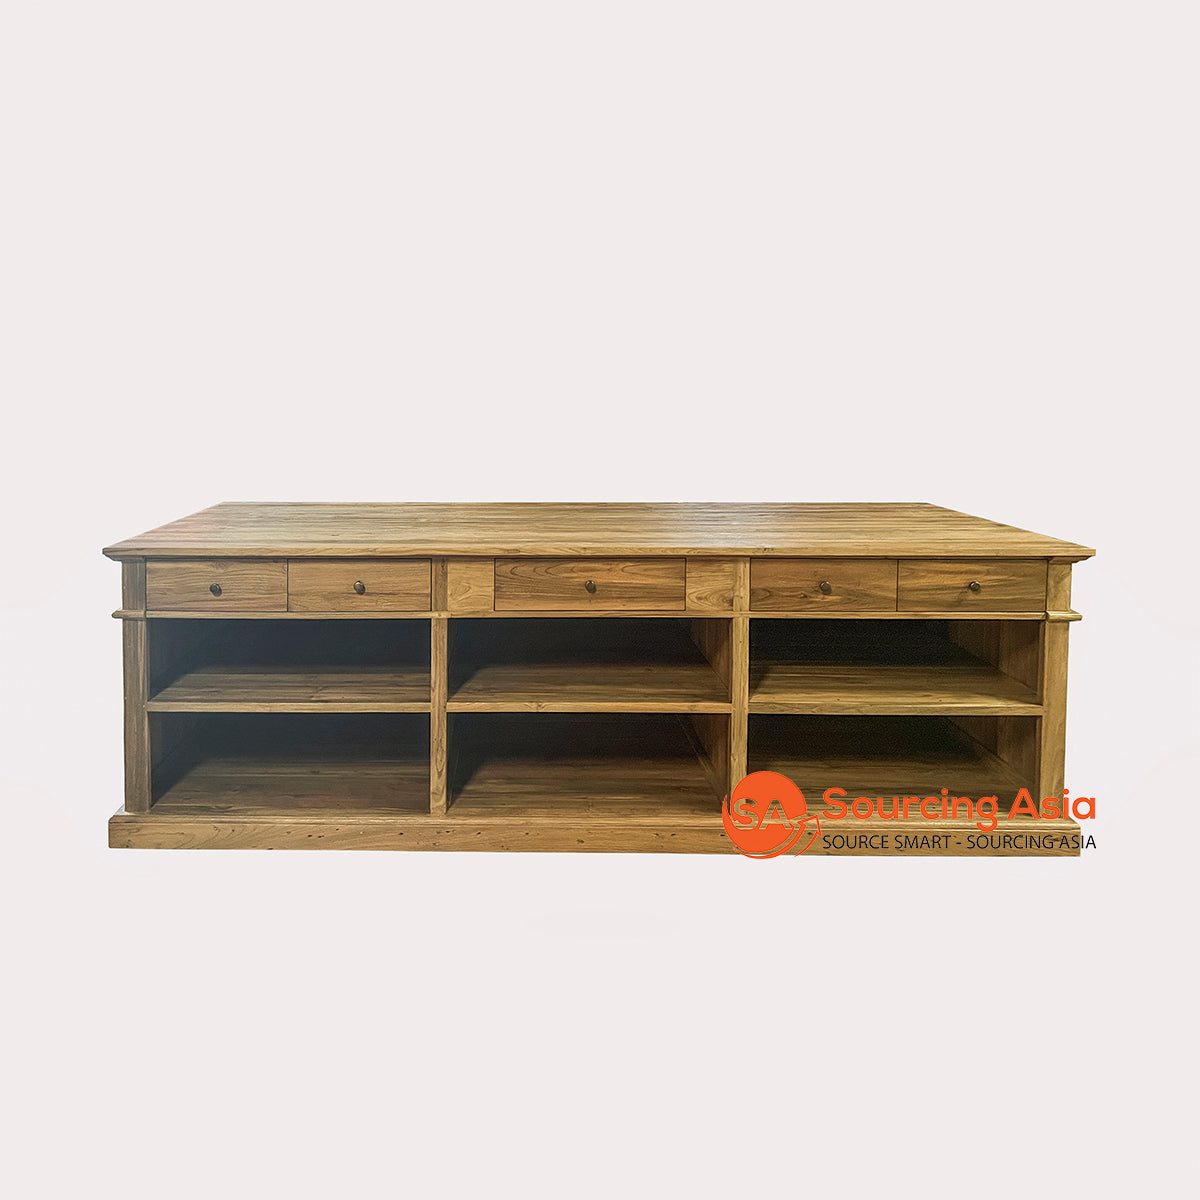 KYT487 RCY TEAK COUNTER WITH 6 DRAWERS